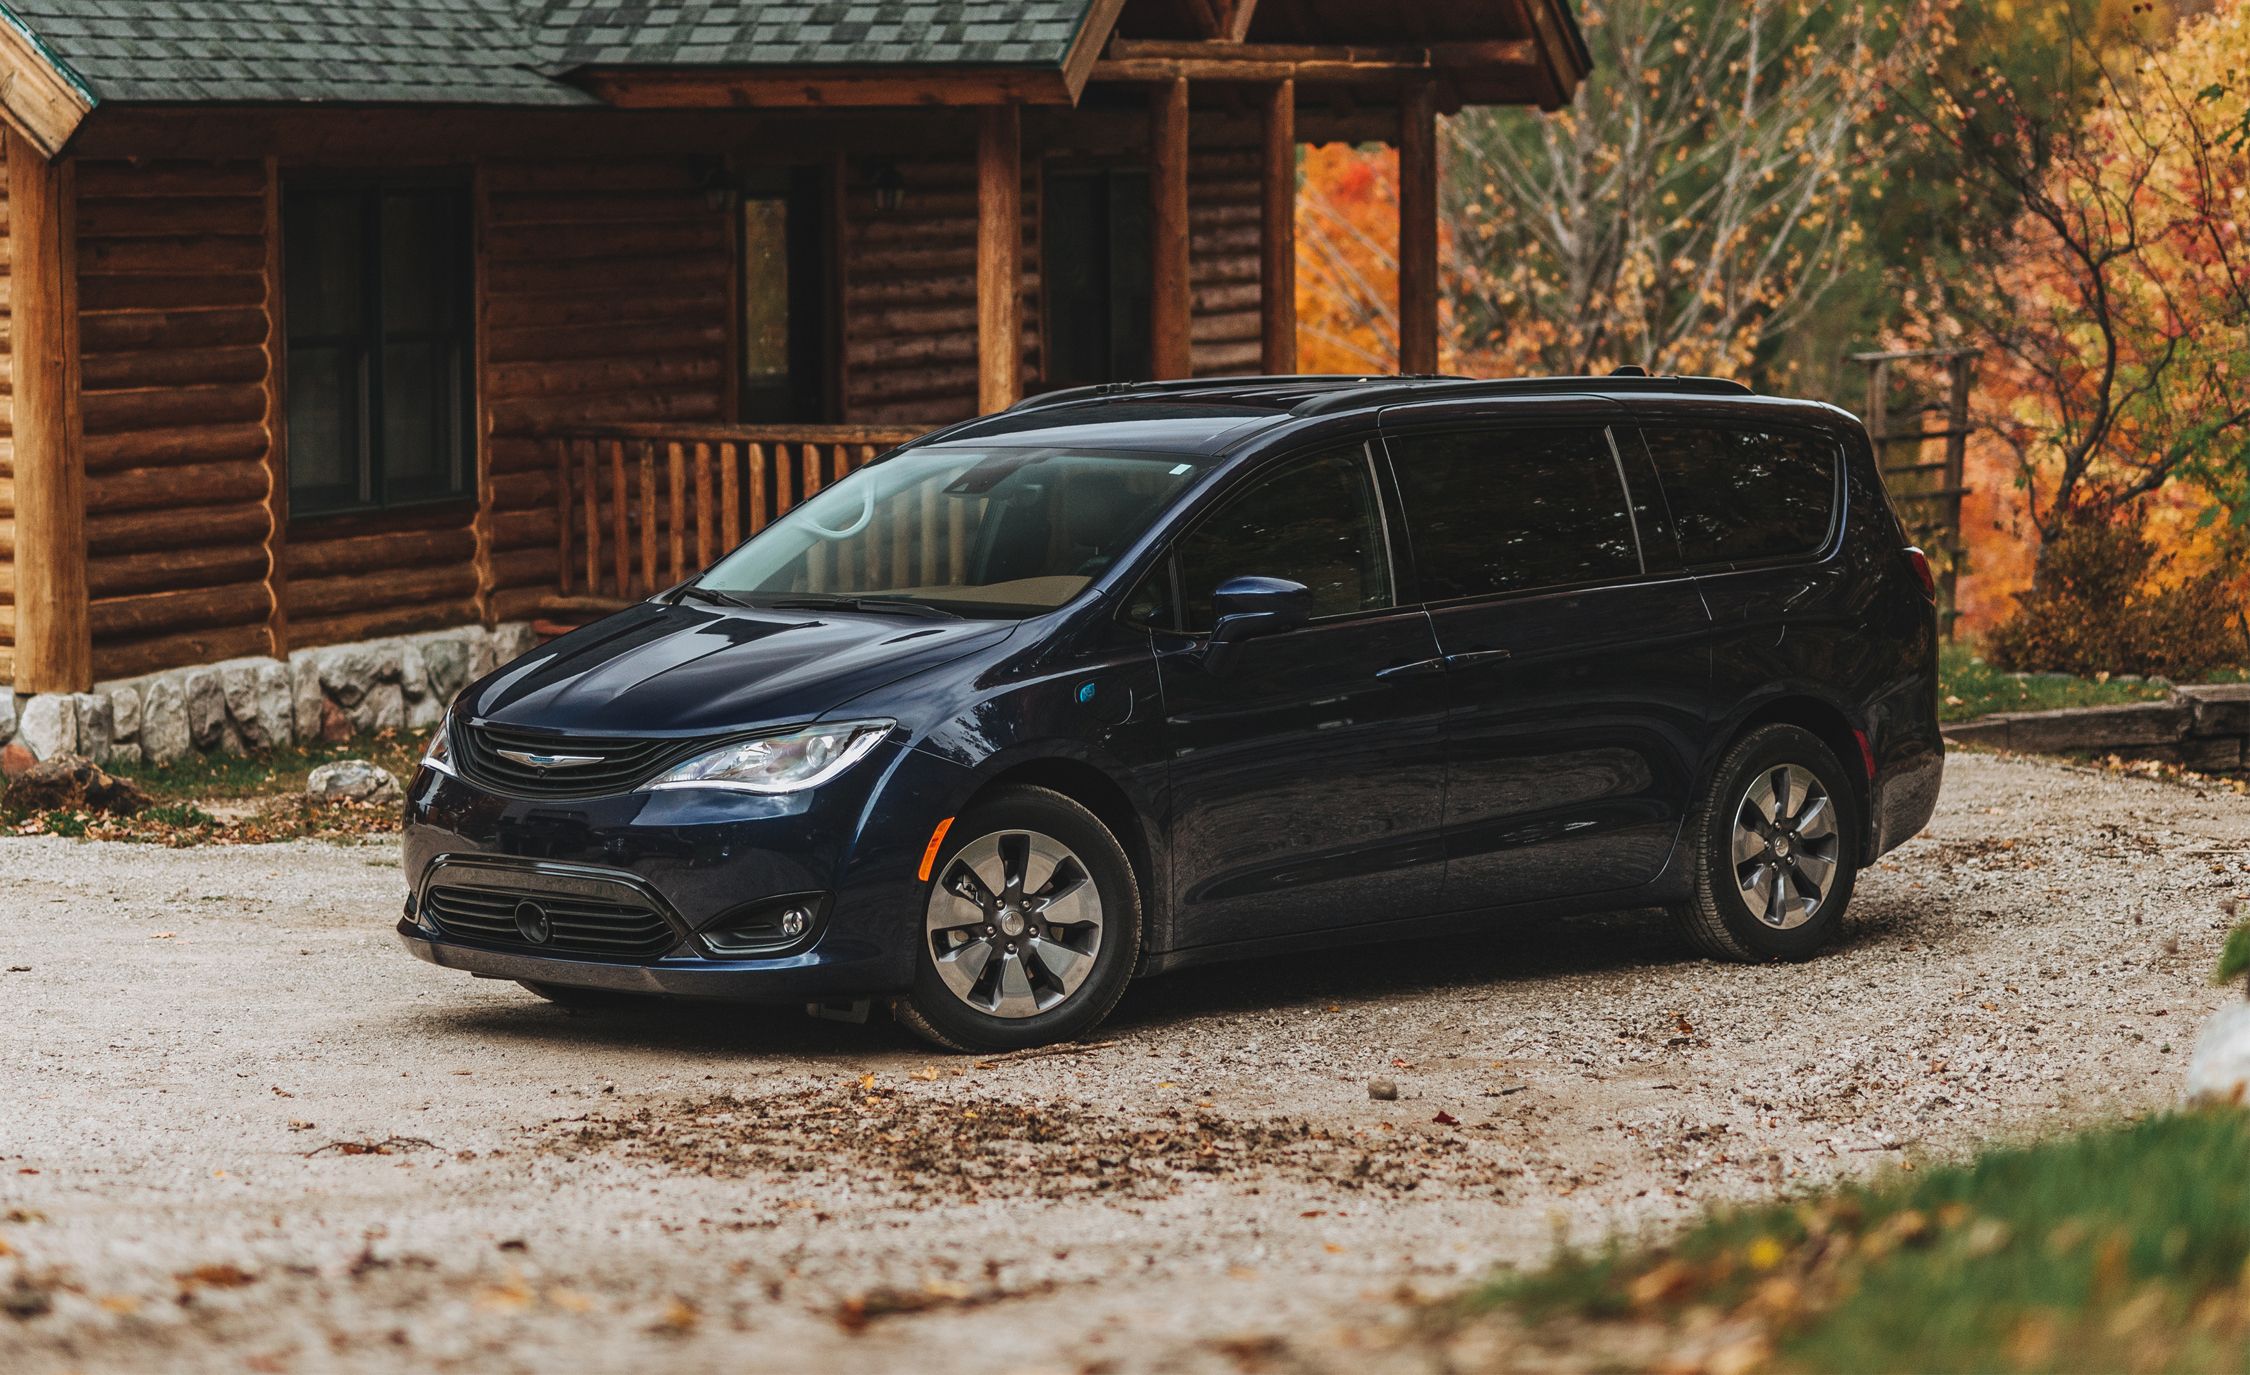 How Reliable Is the 2018 Chrysler Pacifica Hybrid?